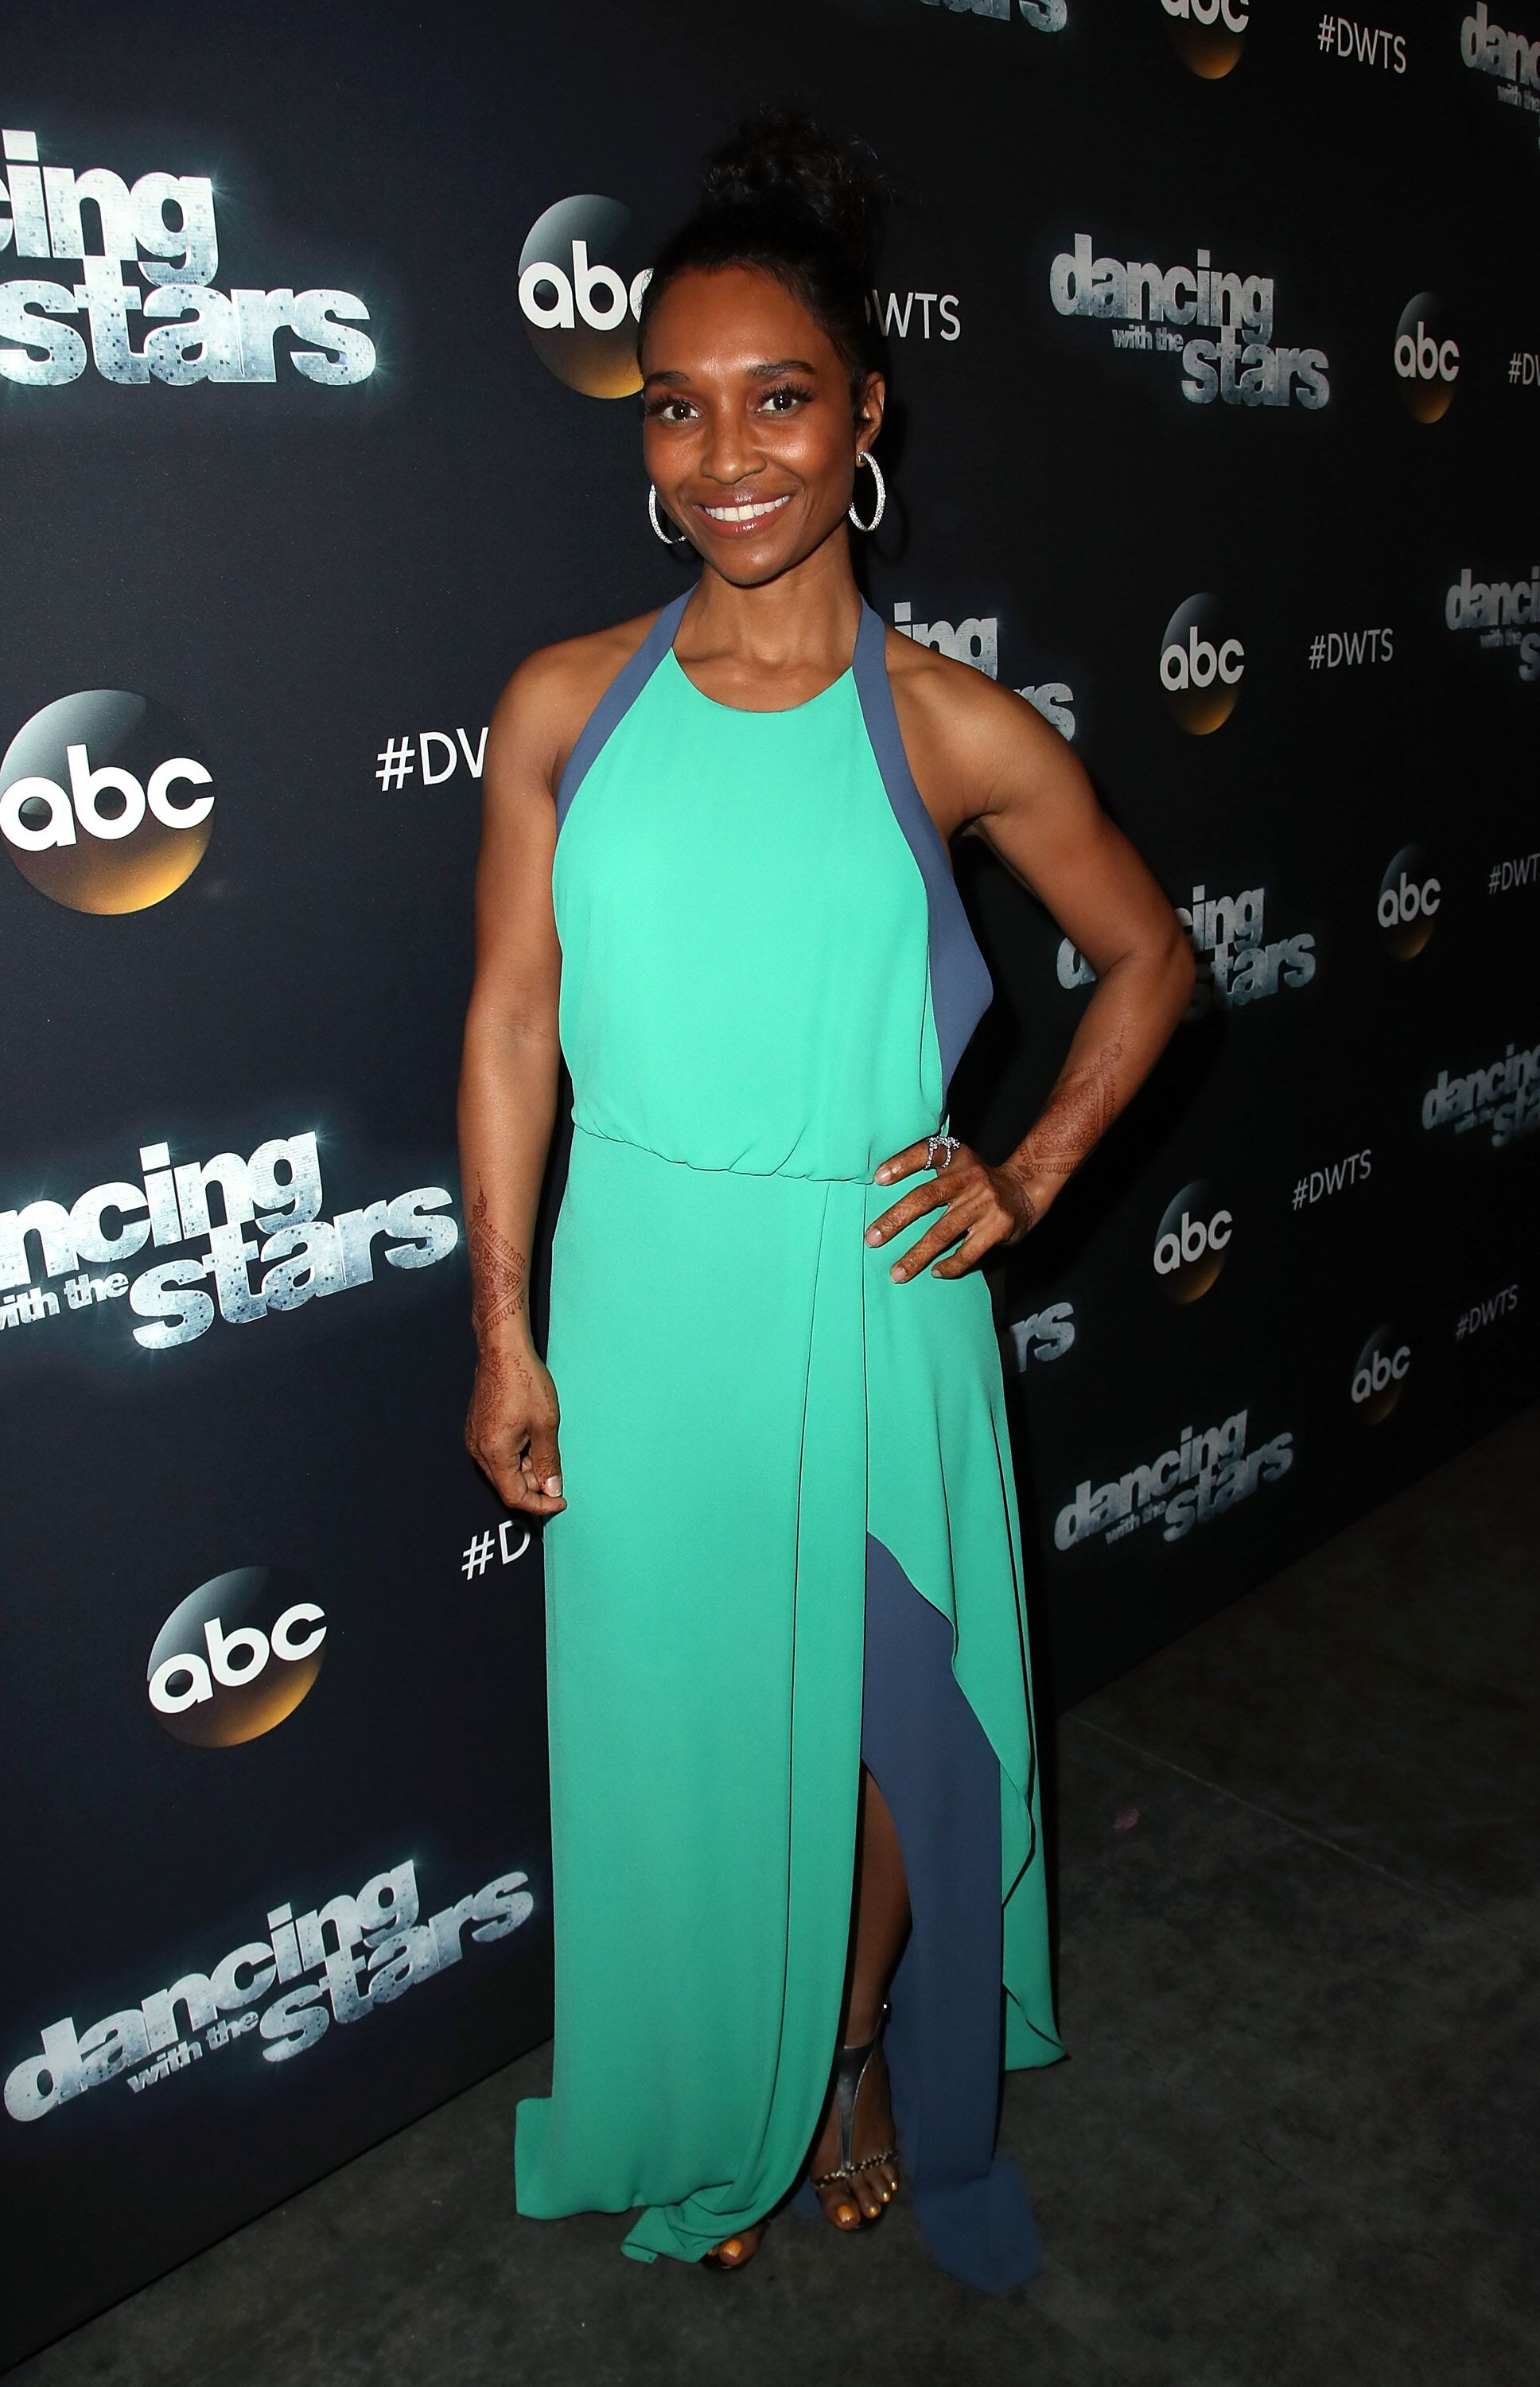 Rozonda "Chilli" Thomas attending "Dancing With The Stars" Season 24 in April 2017. | Photo: Getty Images